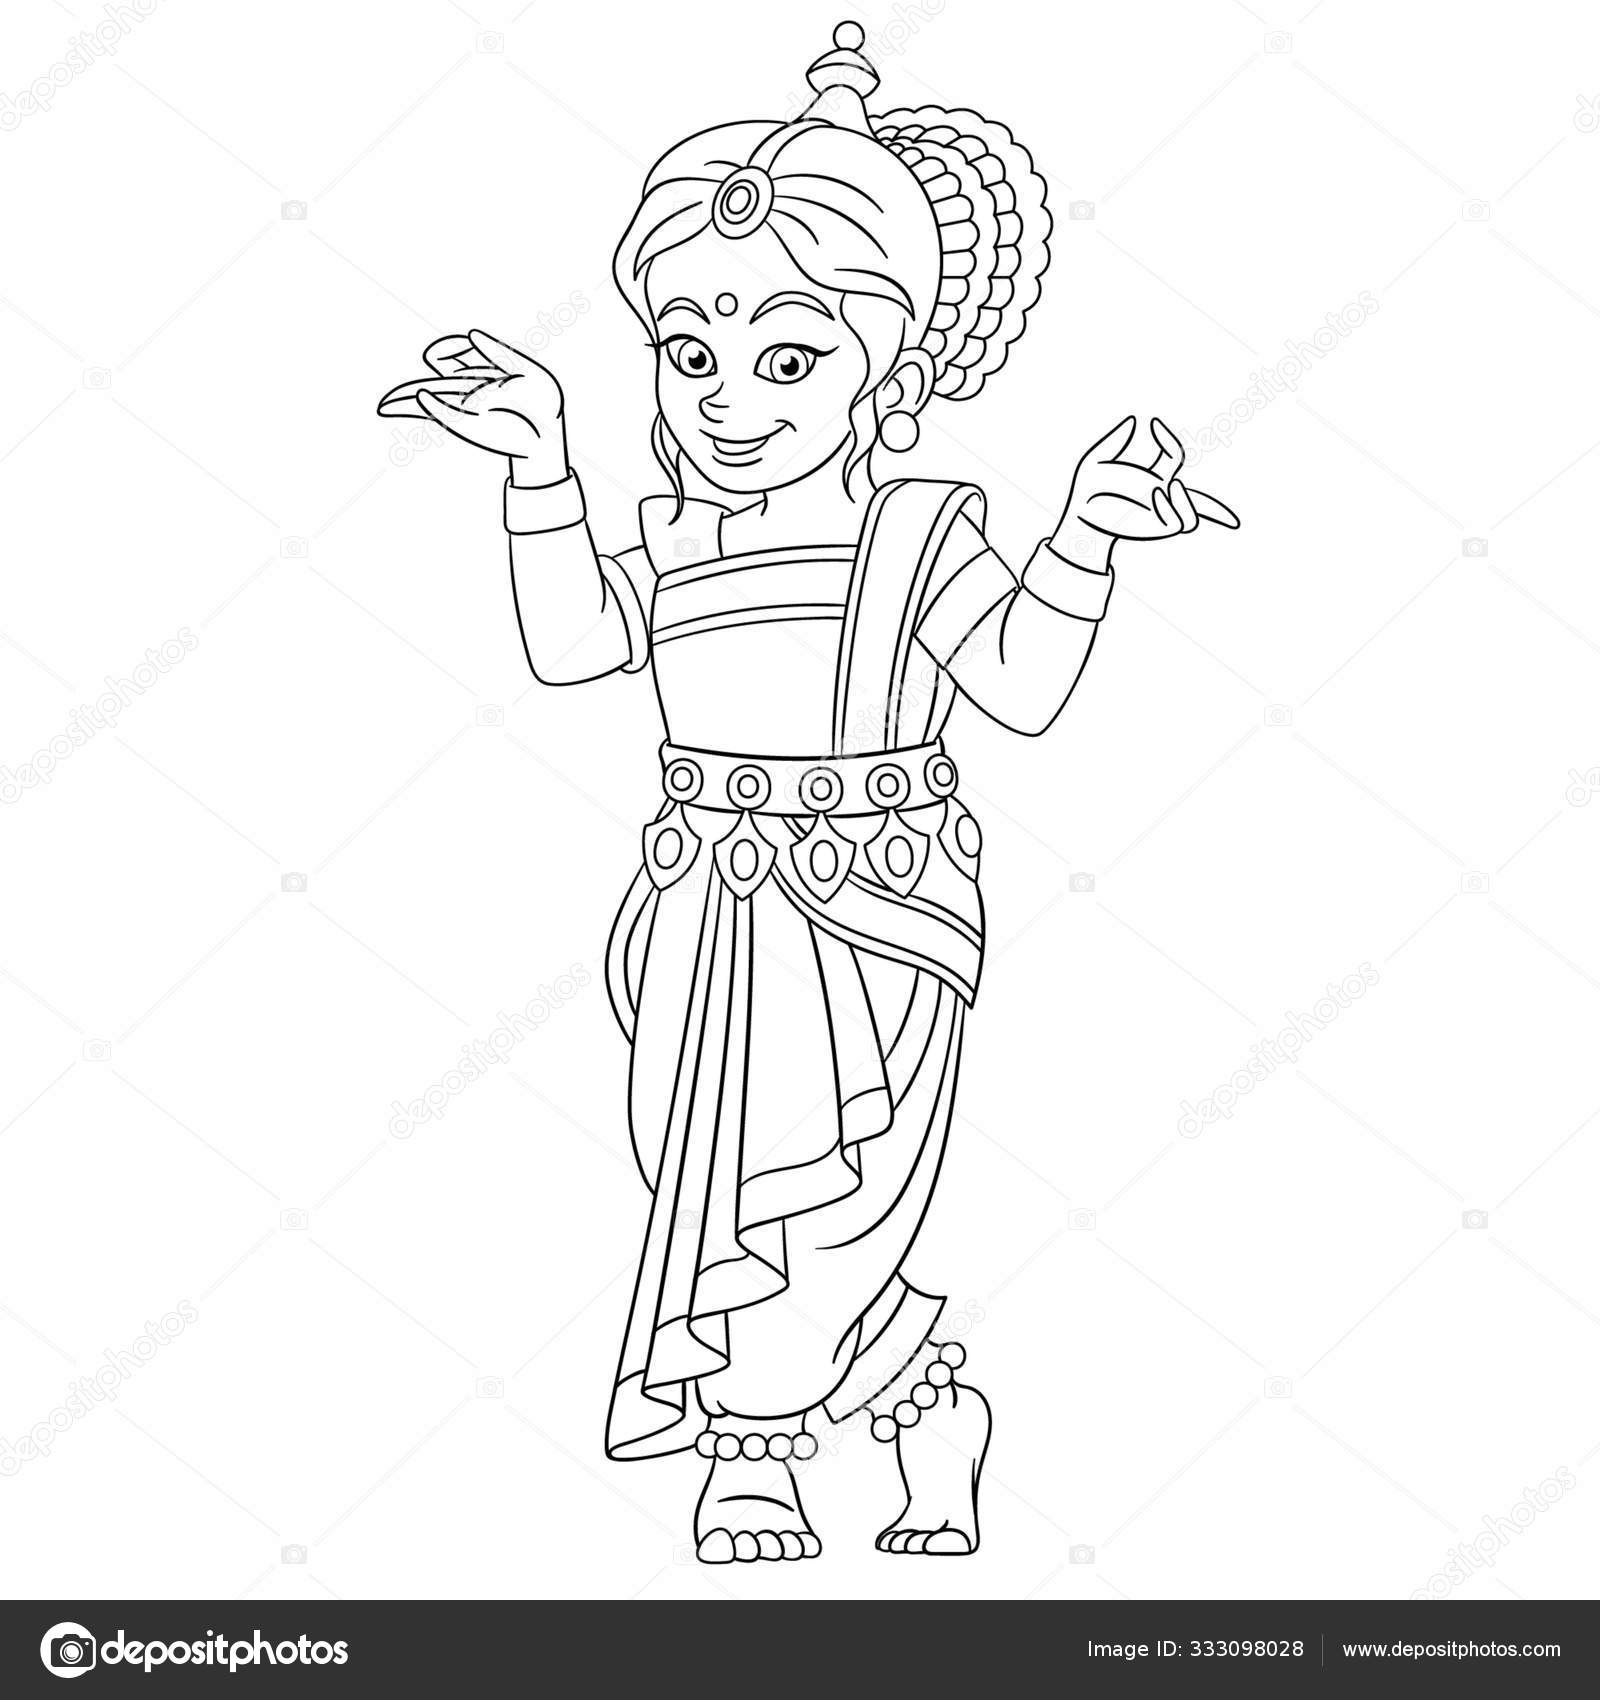 Coloring page with indian dancing girl stock vector by sybirko